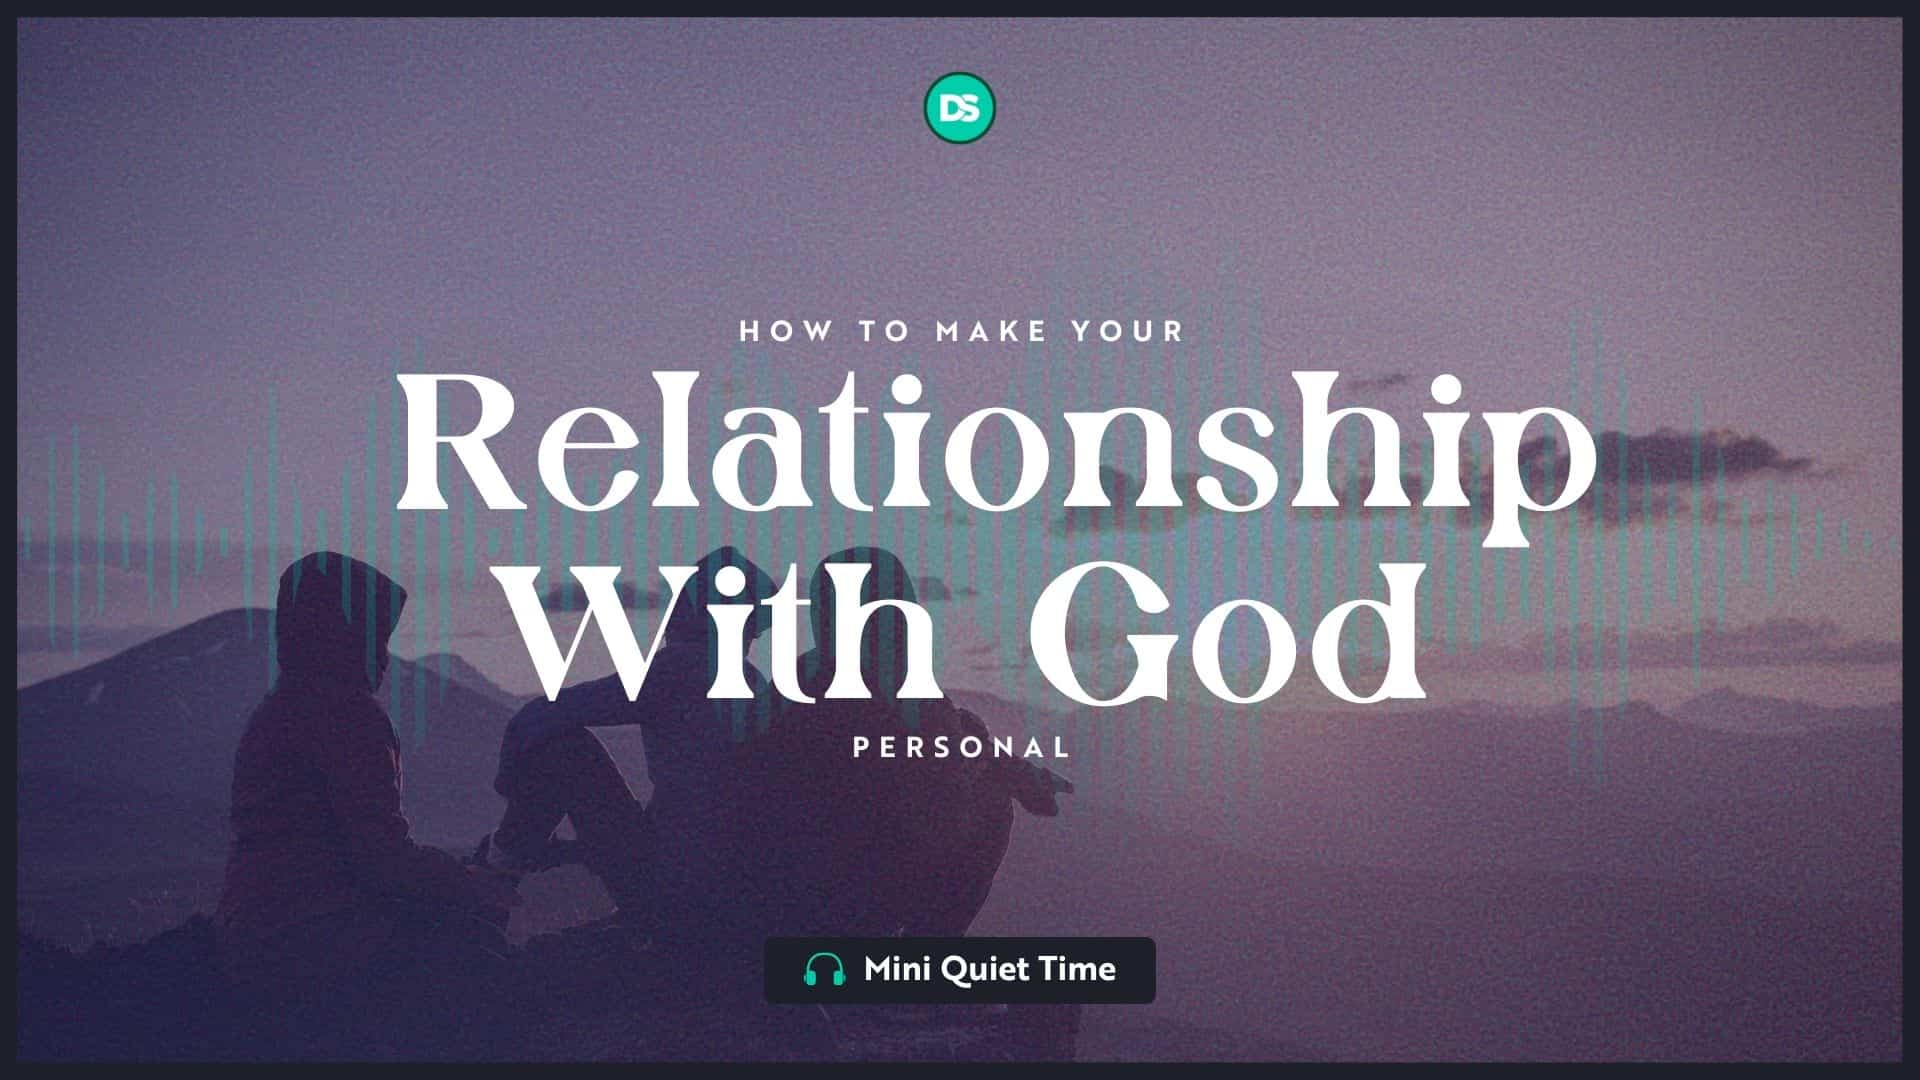 How to Make Your Relationship With God Personal (Mini Quiet Time) 2